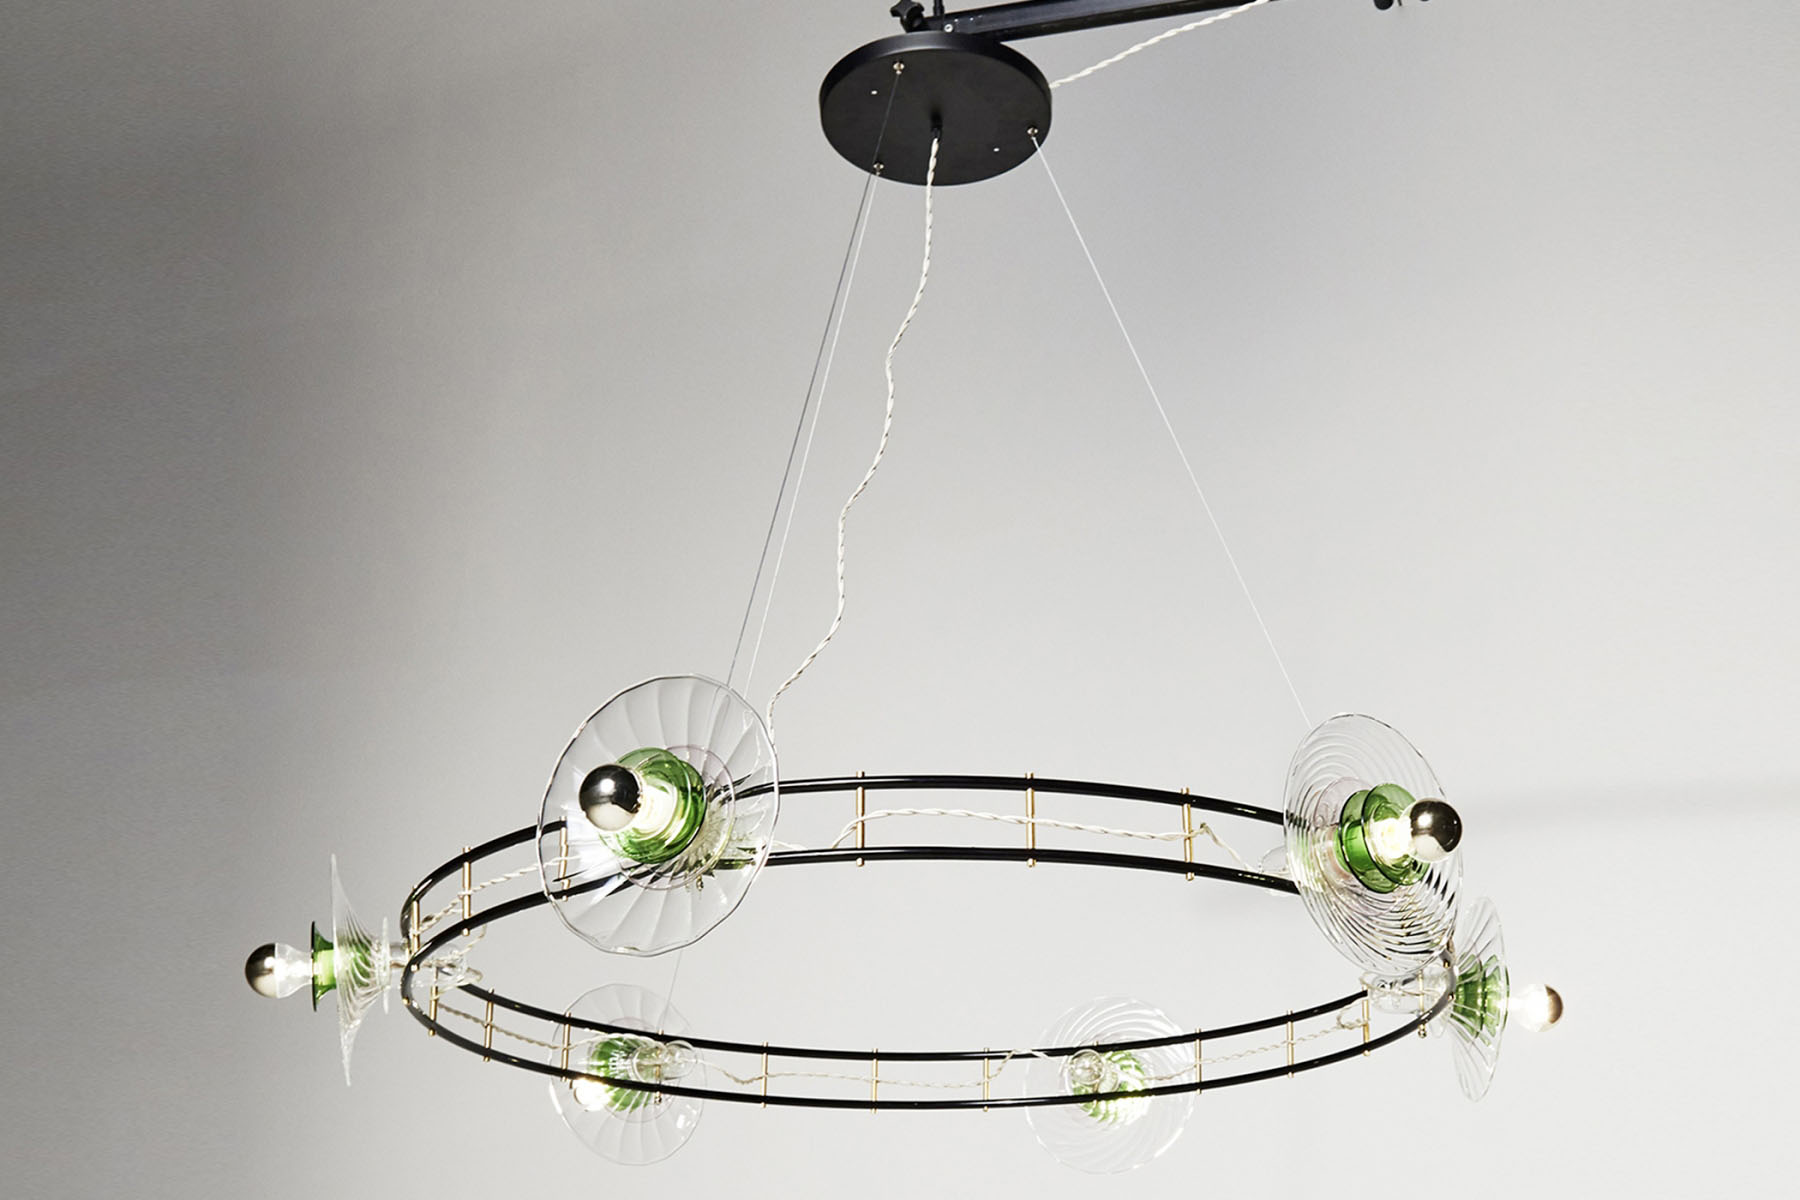 CrissCross collection - Ring chandelier Bethan Laura Wood pic-1